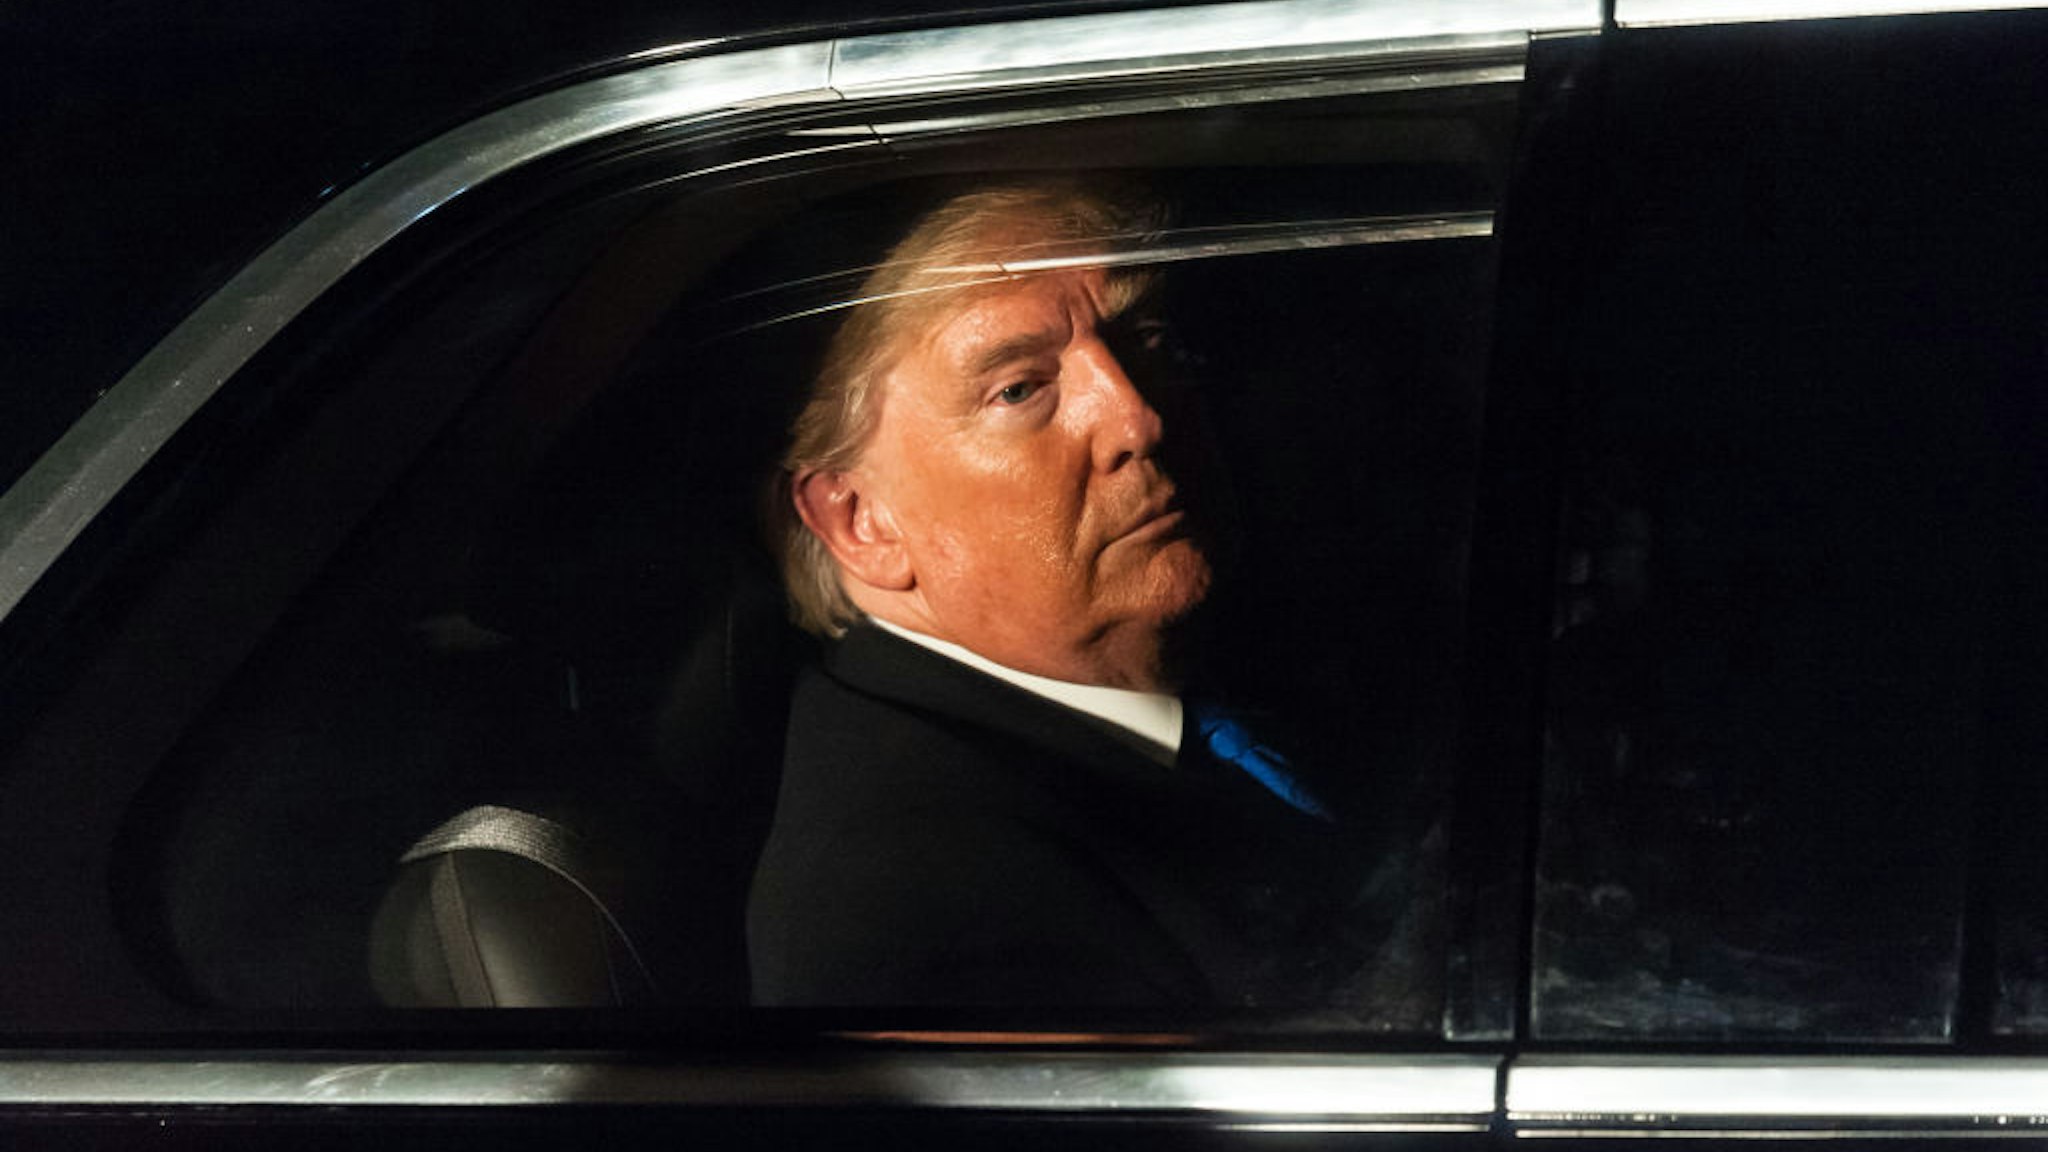 US President Donald Trump leaves 10 Downing Street in his state car 'The Beast' after attending reception for NATO leaders hosted by British Prime Minister Boris Johnson on 03 December, 2019 in London, England, ahead of the main summit tomorrow held to commemorate the 70th anniversary of NATO. (Photo by WIktor Szymanowicz/NurPhoto)